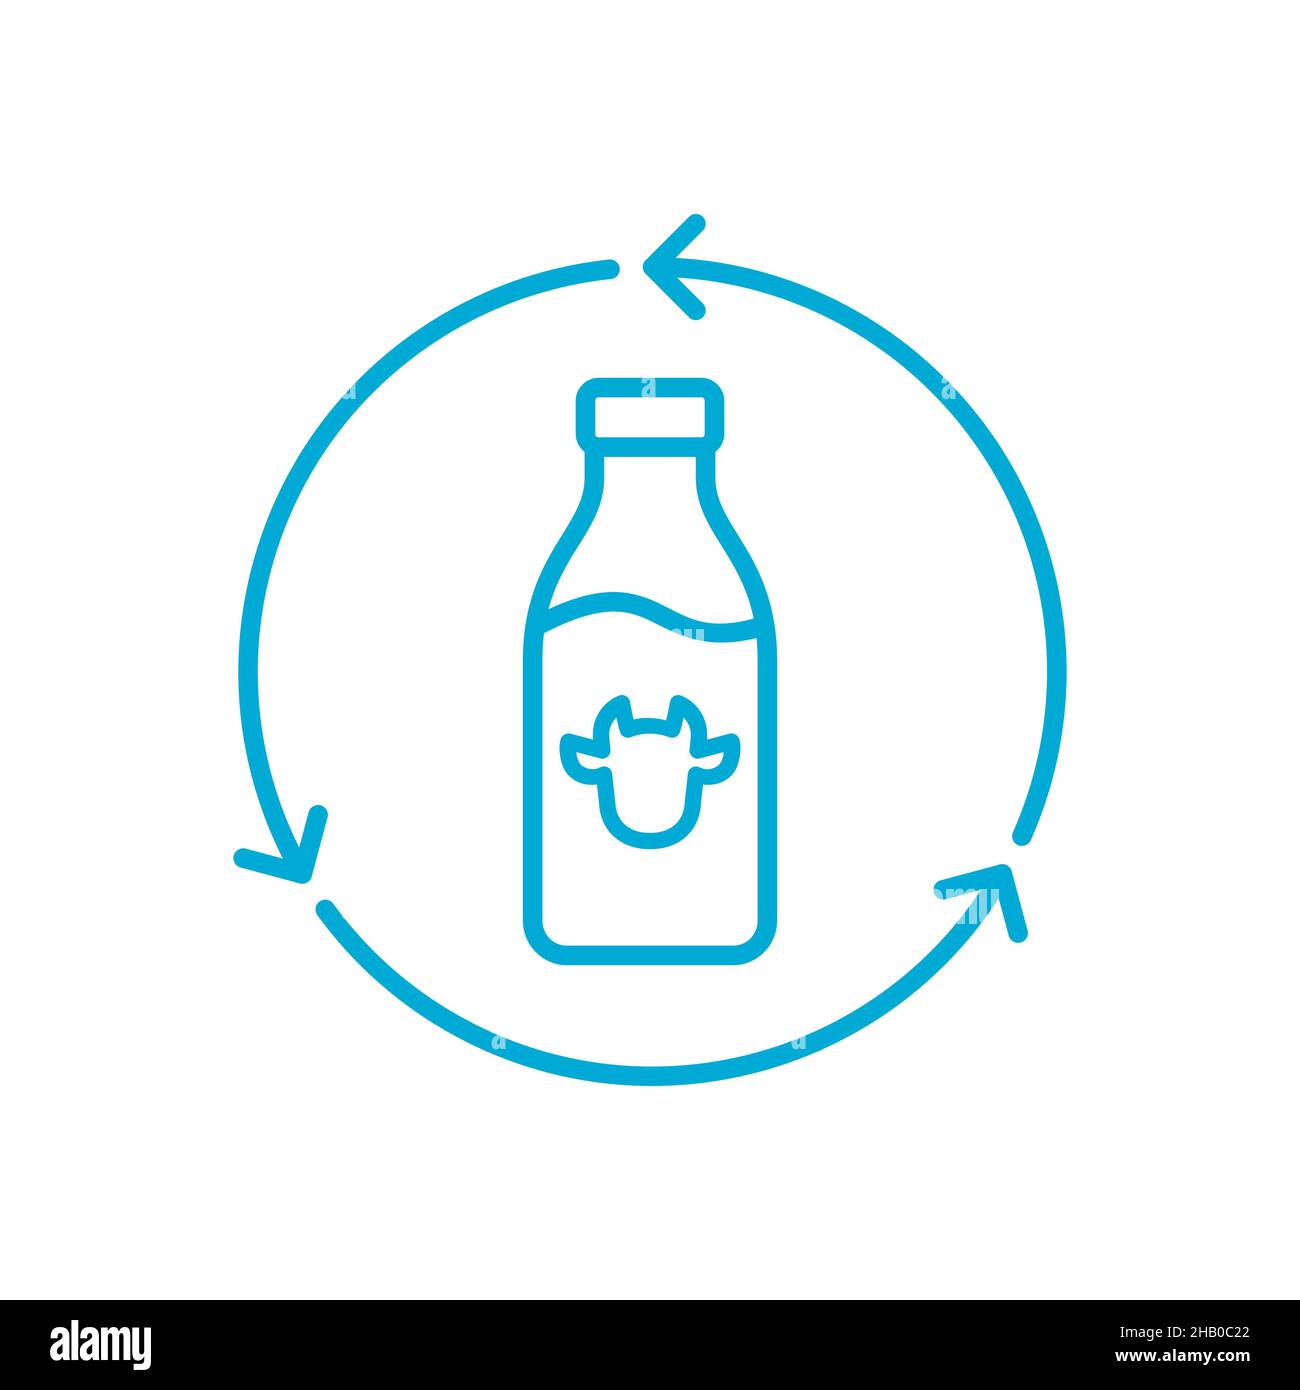 Reusable milk bottle line icon. Refillable glass milk bottle with recycle arrows. Eco friendly sustainable packaging. Returnable fresh milk container. Stock Vector